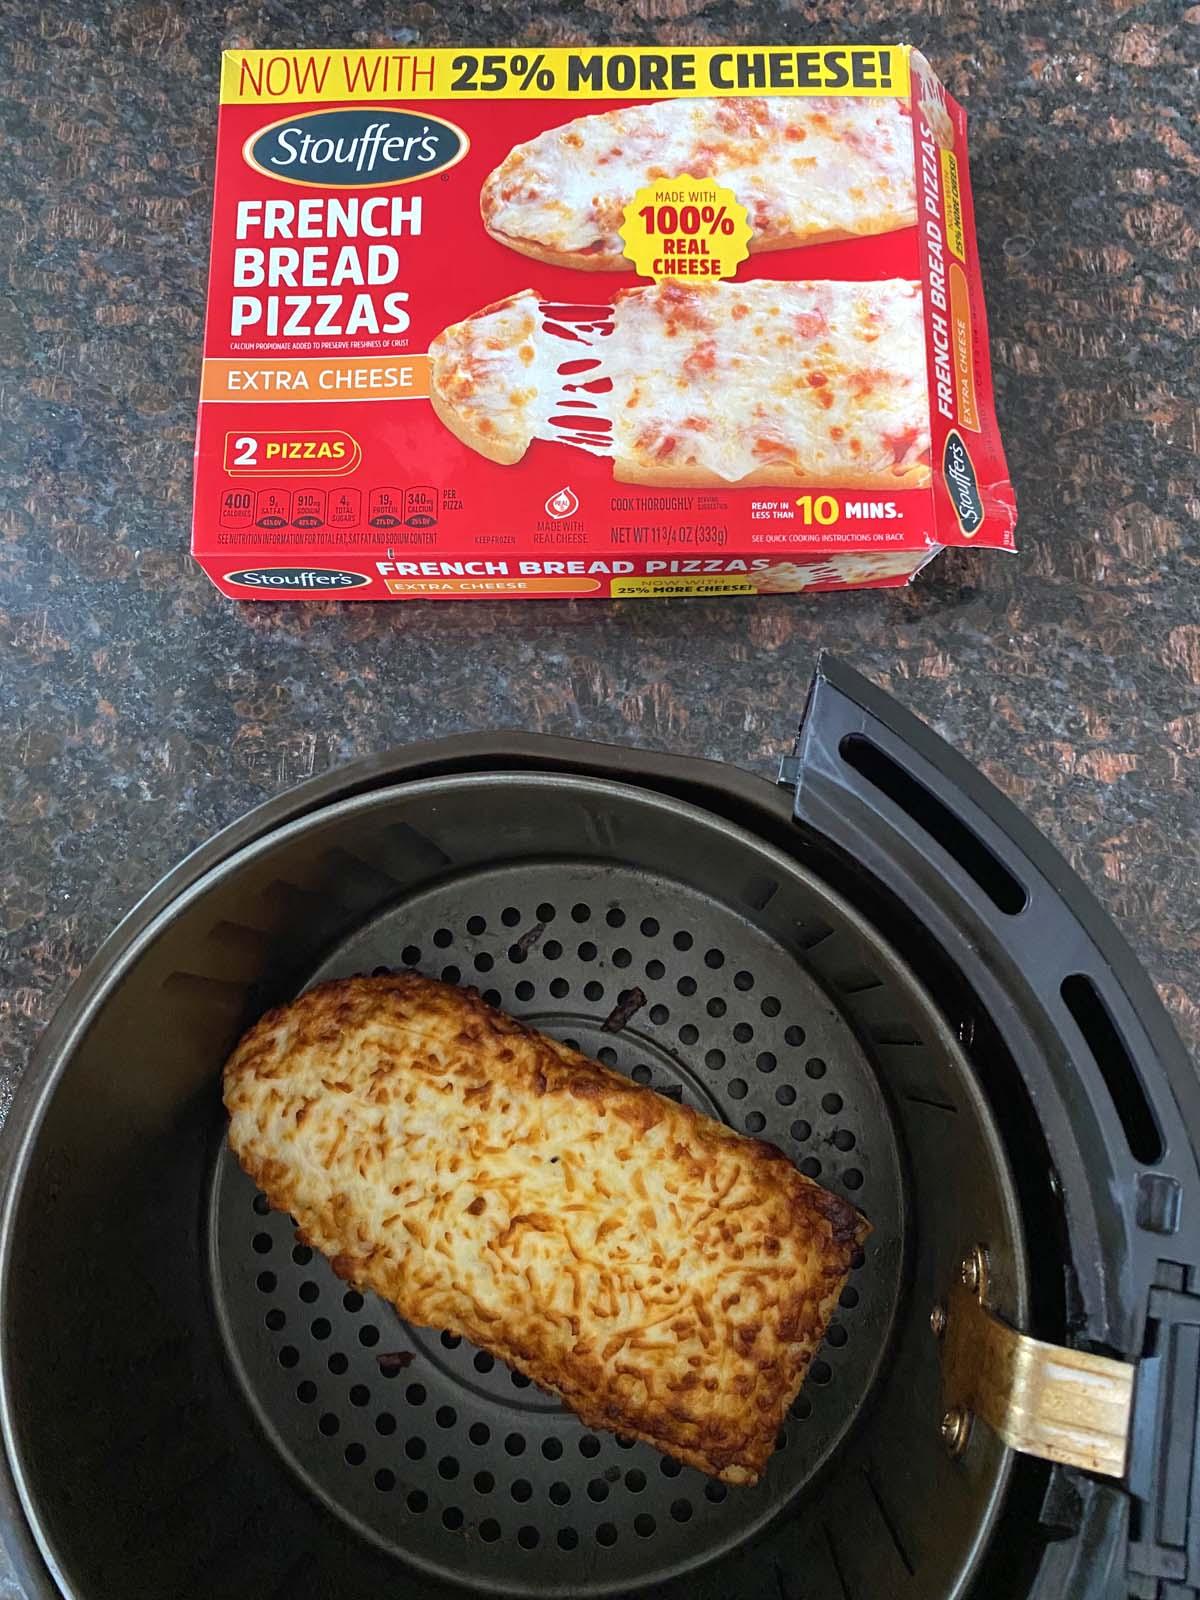 Box of French bread pizza in front of an air fryer.